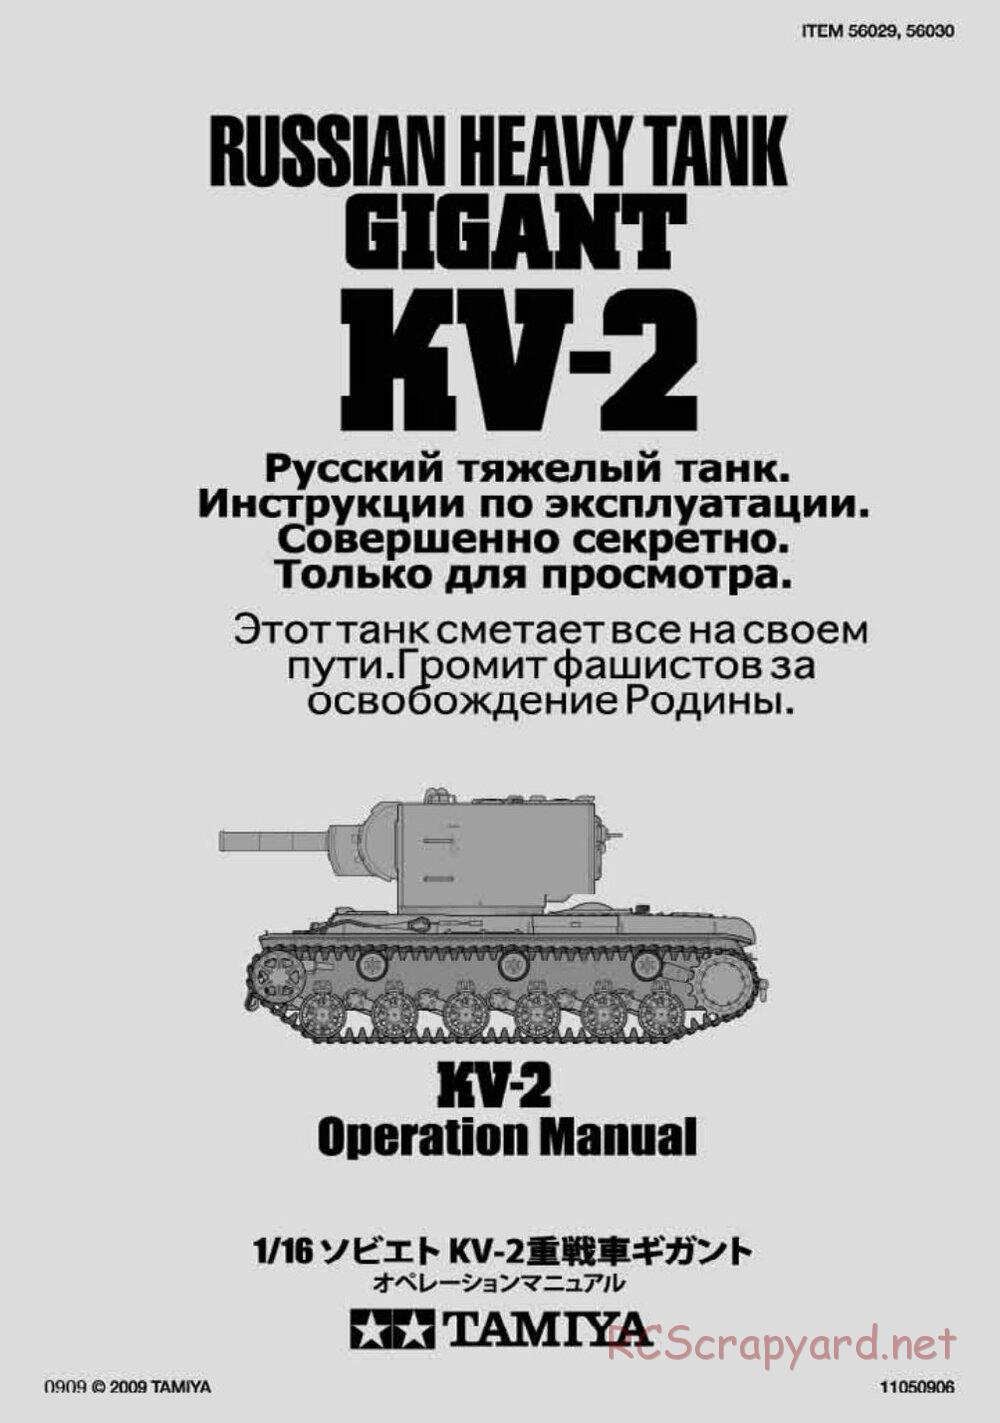 Tamiya - Russian Heavy Tank KV-2 Gigant - 1/16 Scale Chassis - Operation Manual - Page 1